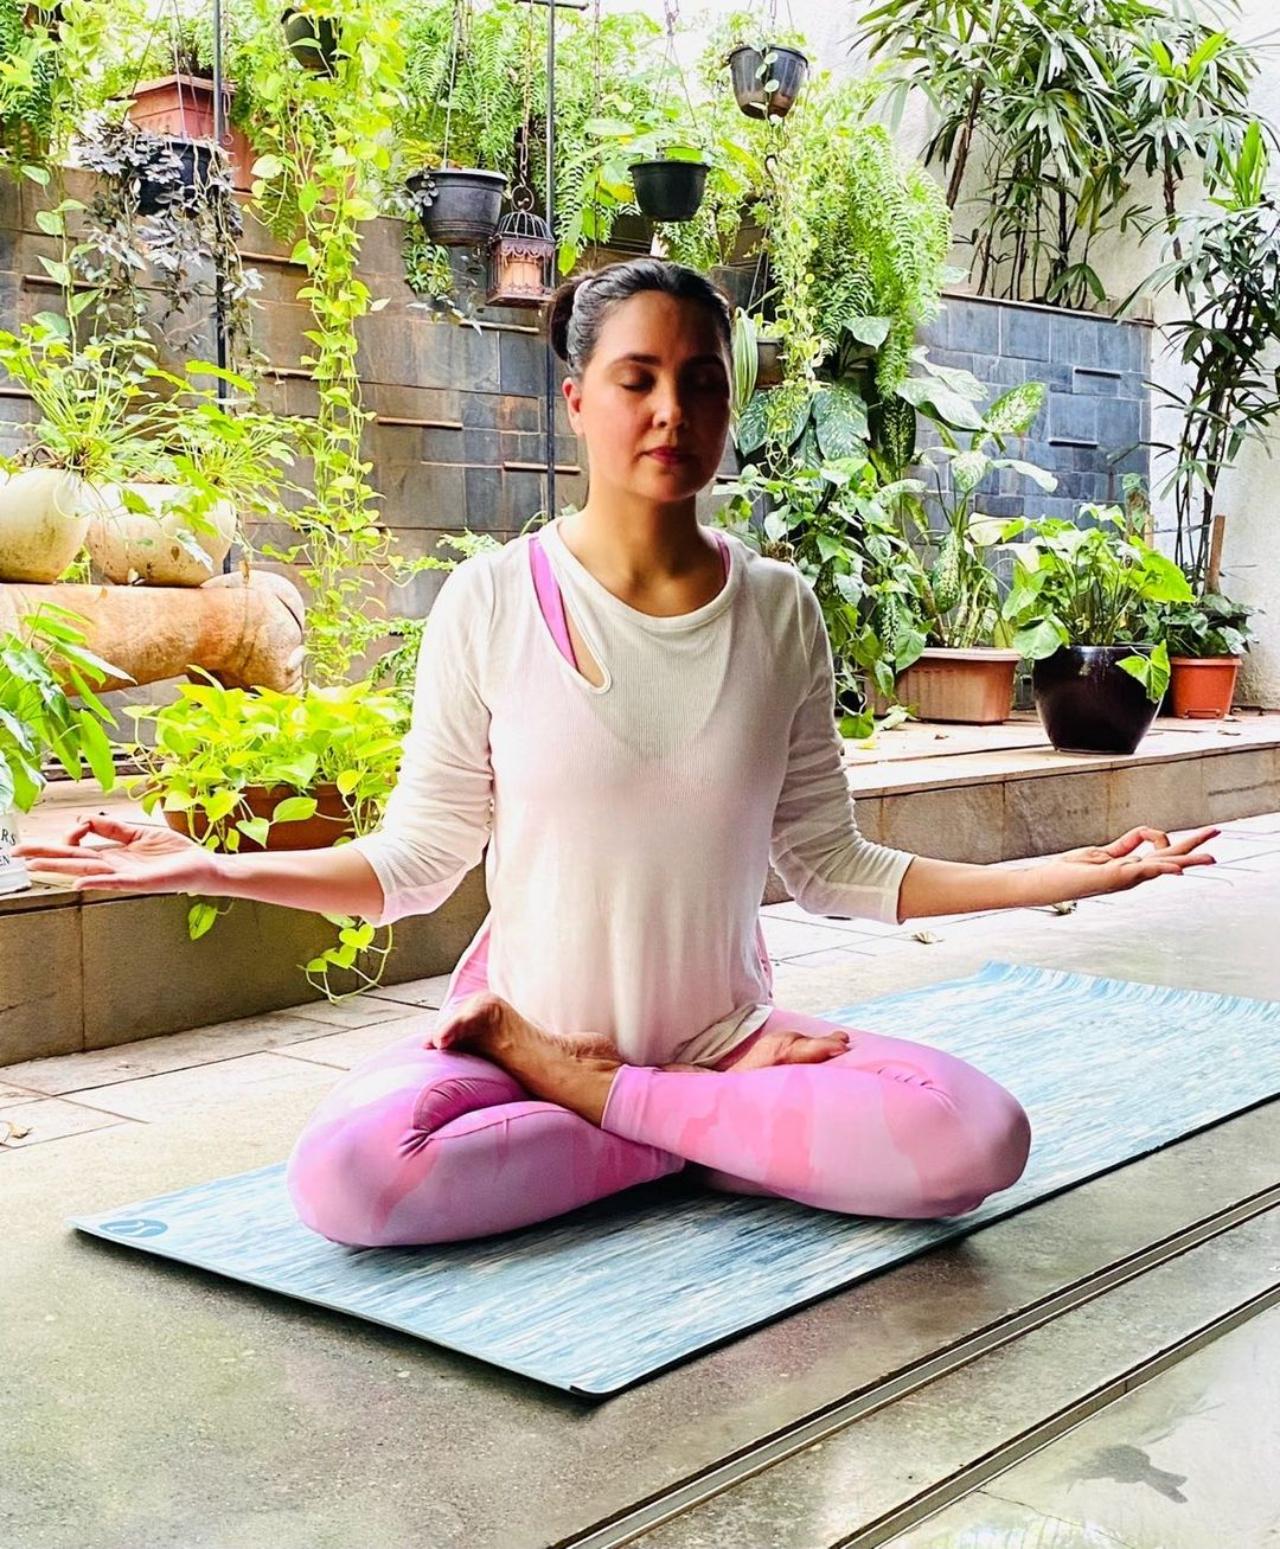 Actress, model and winner of Miss Universe 2000 Lara Bhupati took to Instagram to share a photo of herself sitting cross-legged with her eyes closed and arms raised, palms facing up. In a cream knit top, she looked peaceful during her practice. “The beautiful lightness of being… Be YOU! Free of ego, perceptions, judgements, and limitations. YOU are perfect in every way!!,” she wrote